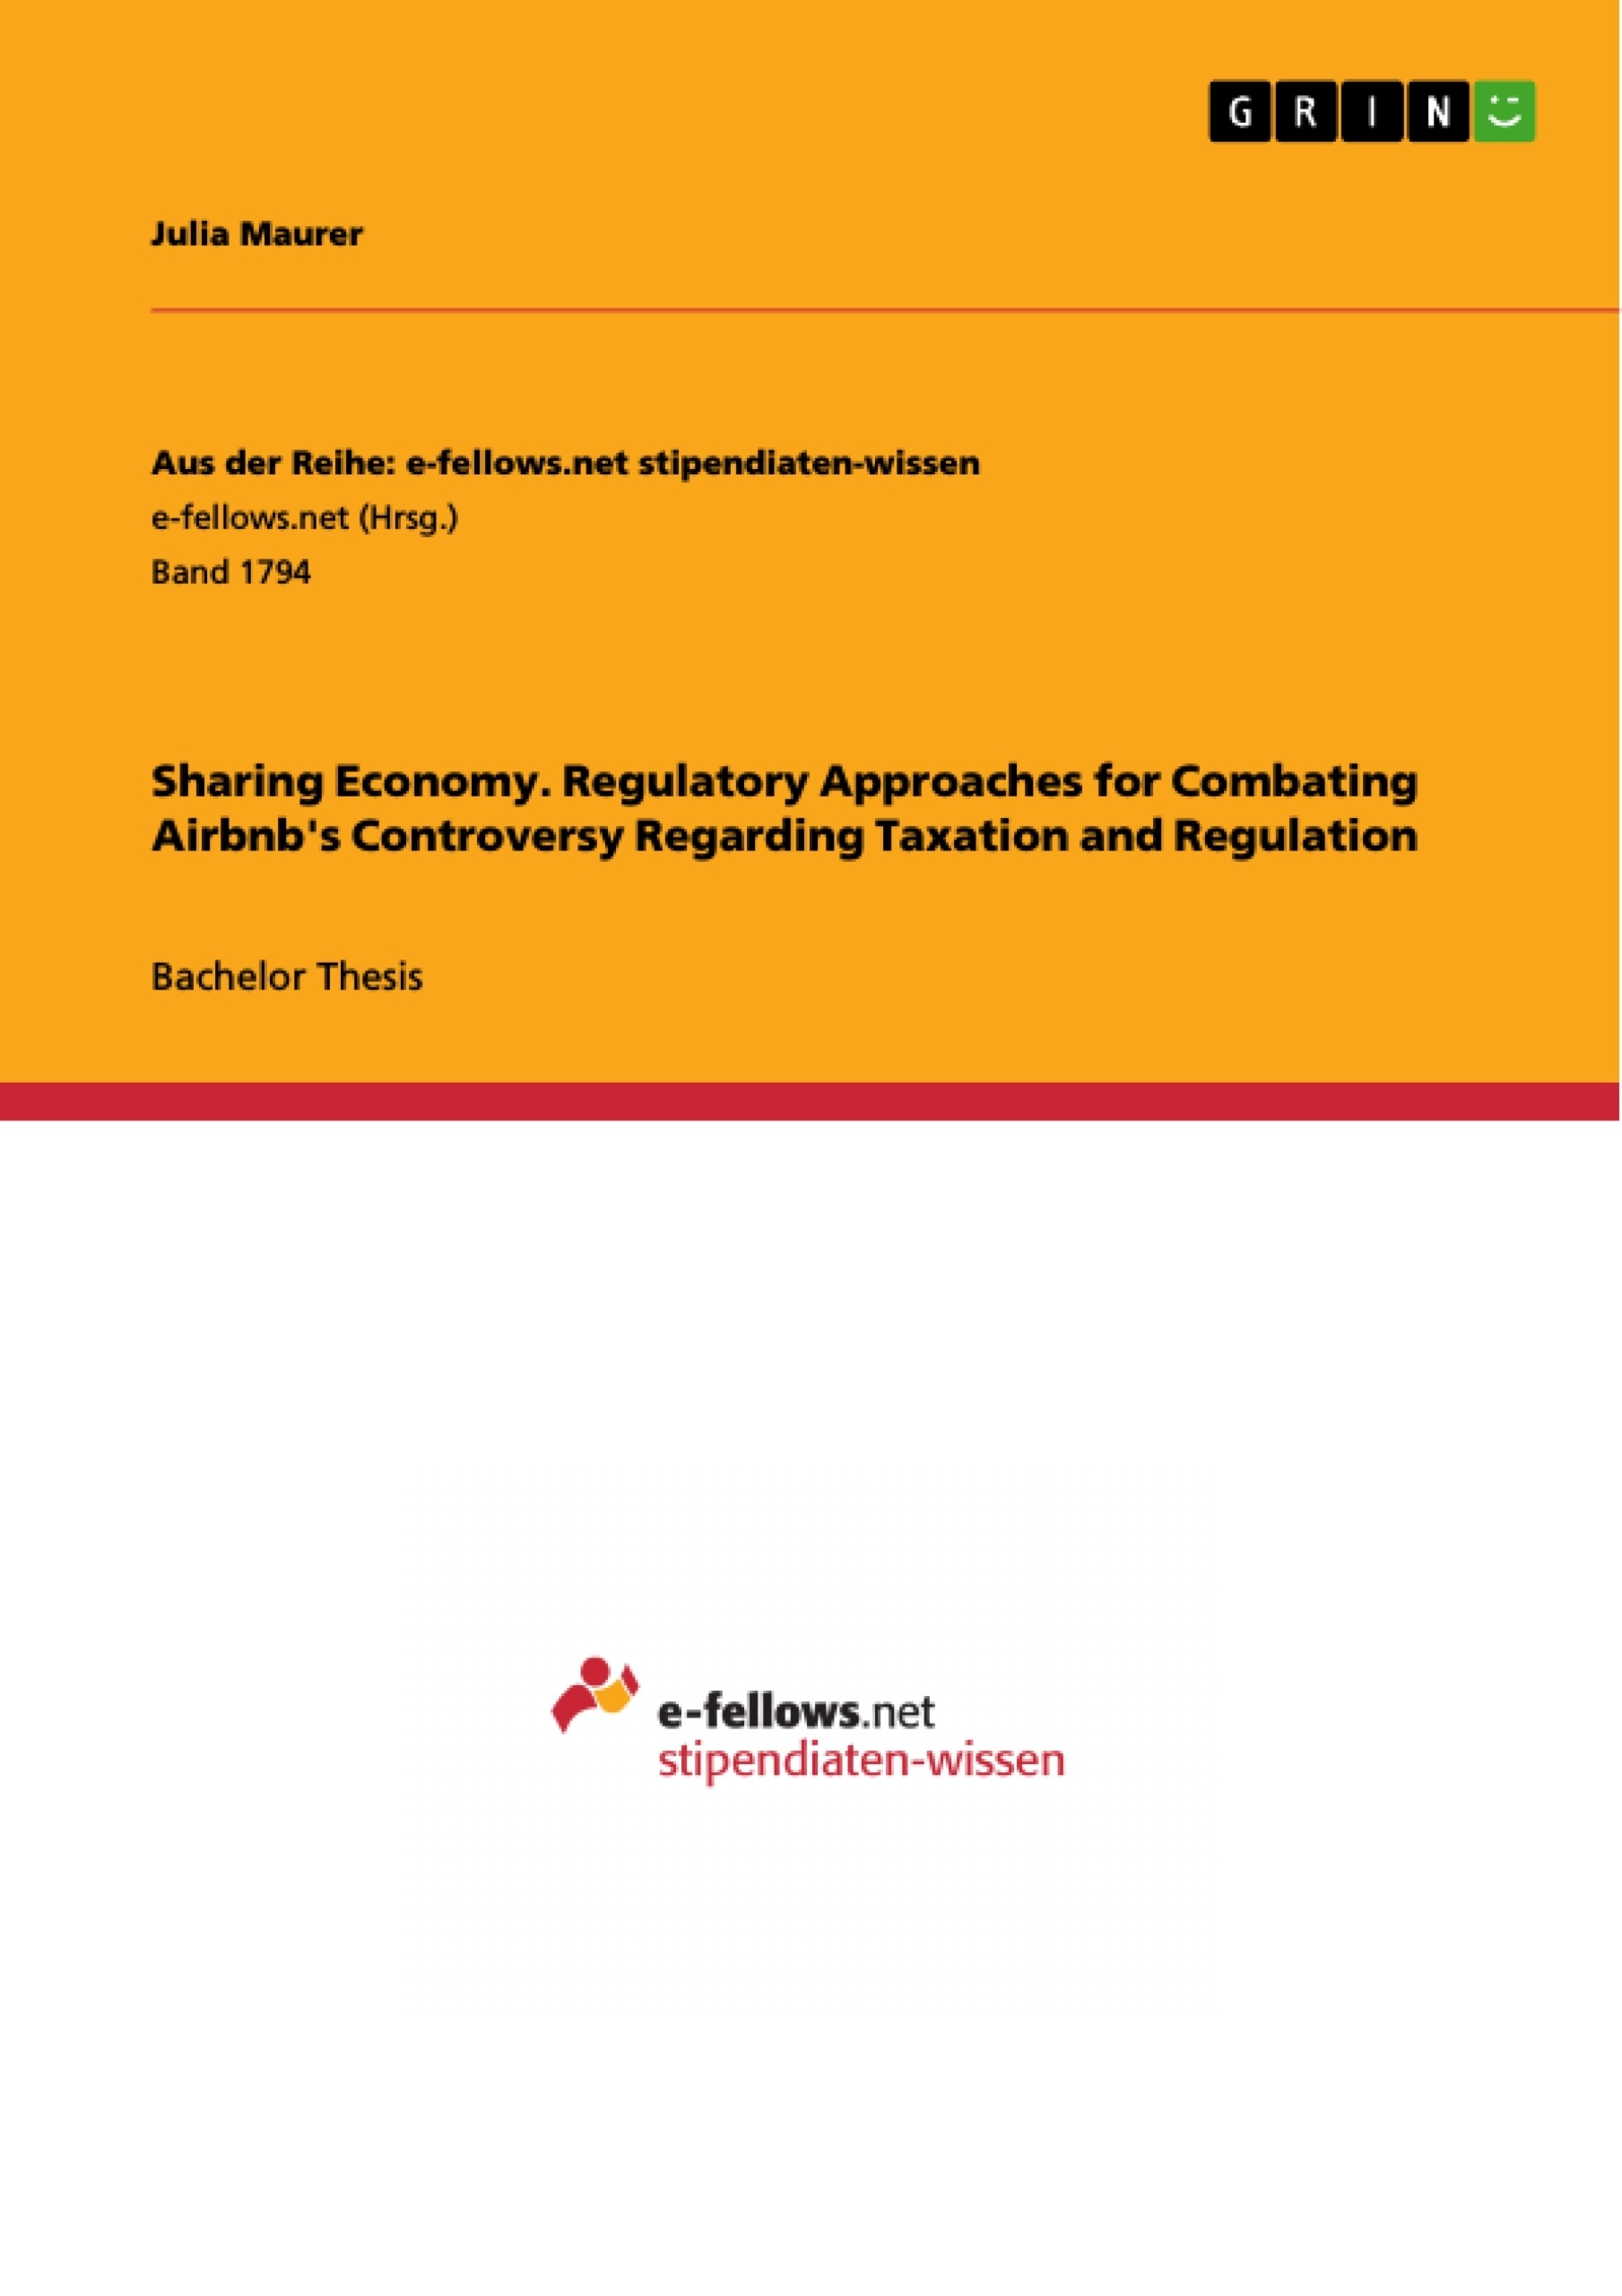 Title: Sharing Economy. Regulatory Approaches for Combating Airbnb's Controversy Regarding Taxation and Regulation